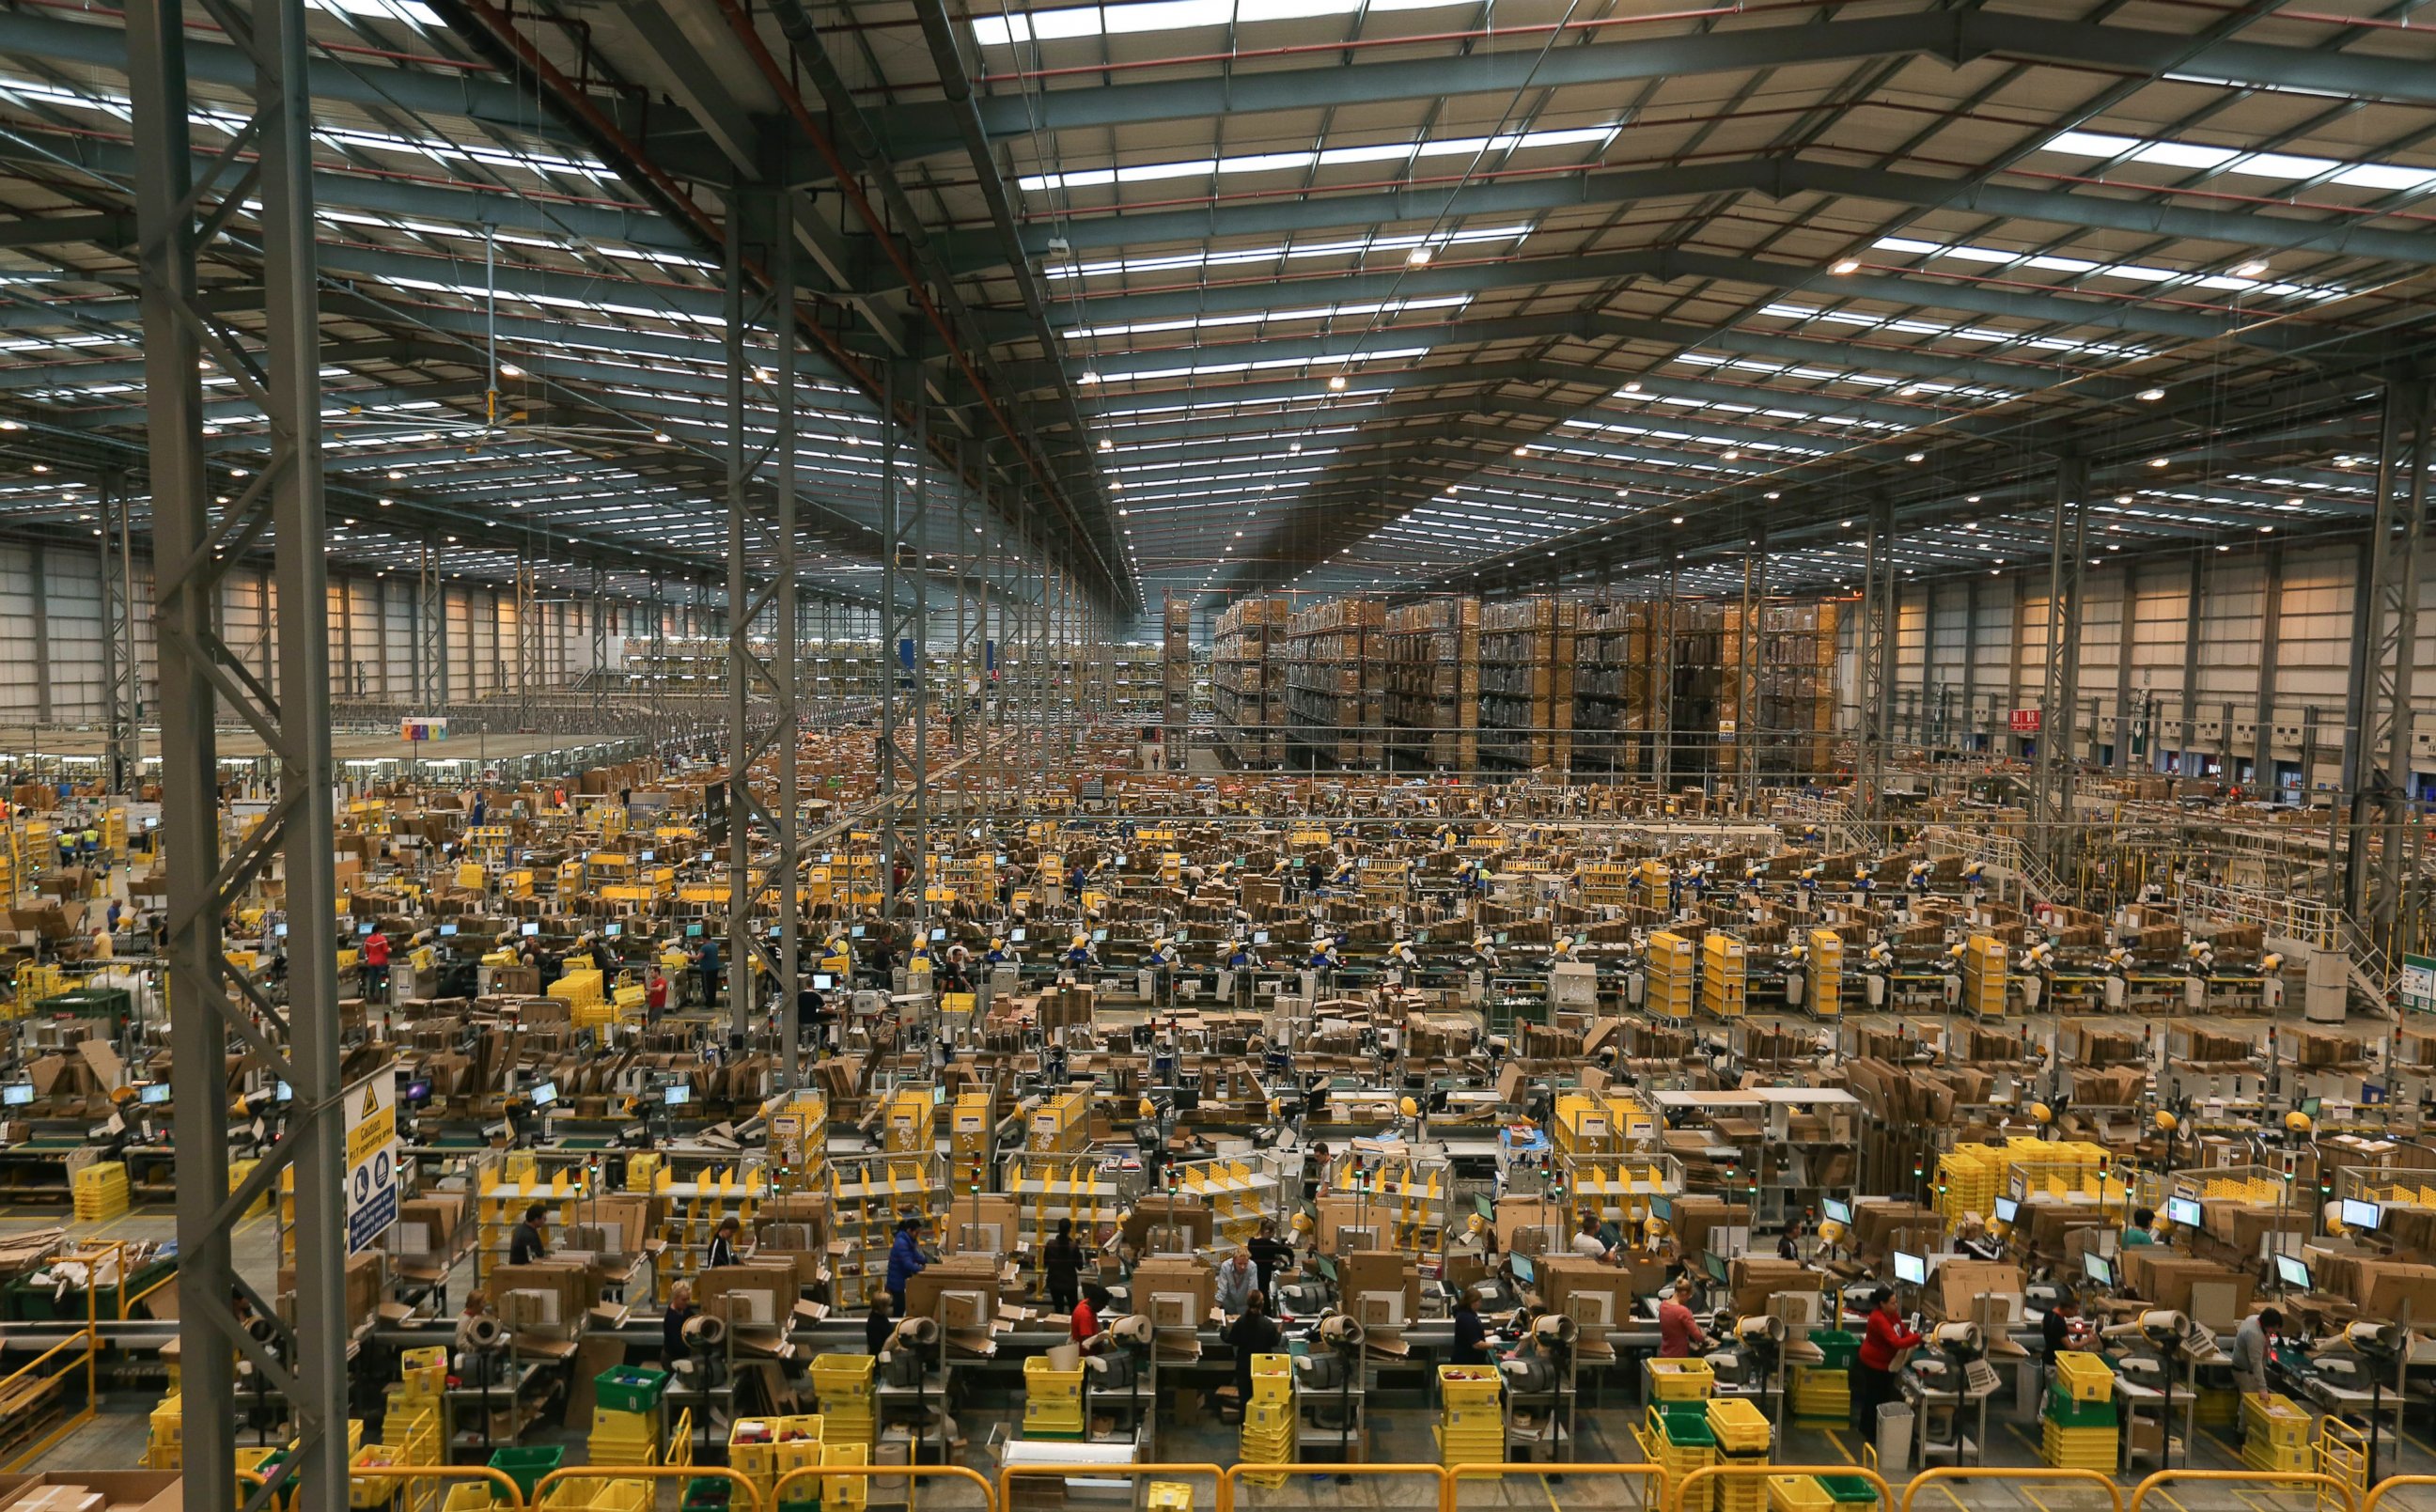 PHOTO: Employees work on the warehouse floor at one of Amazon.com Inc.'s fulfillment centers, Nov. 25, 2014, in Peterborough, U.K. 